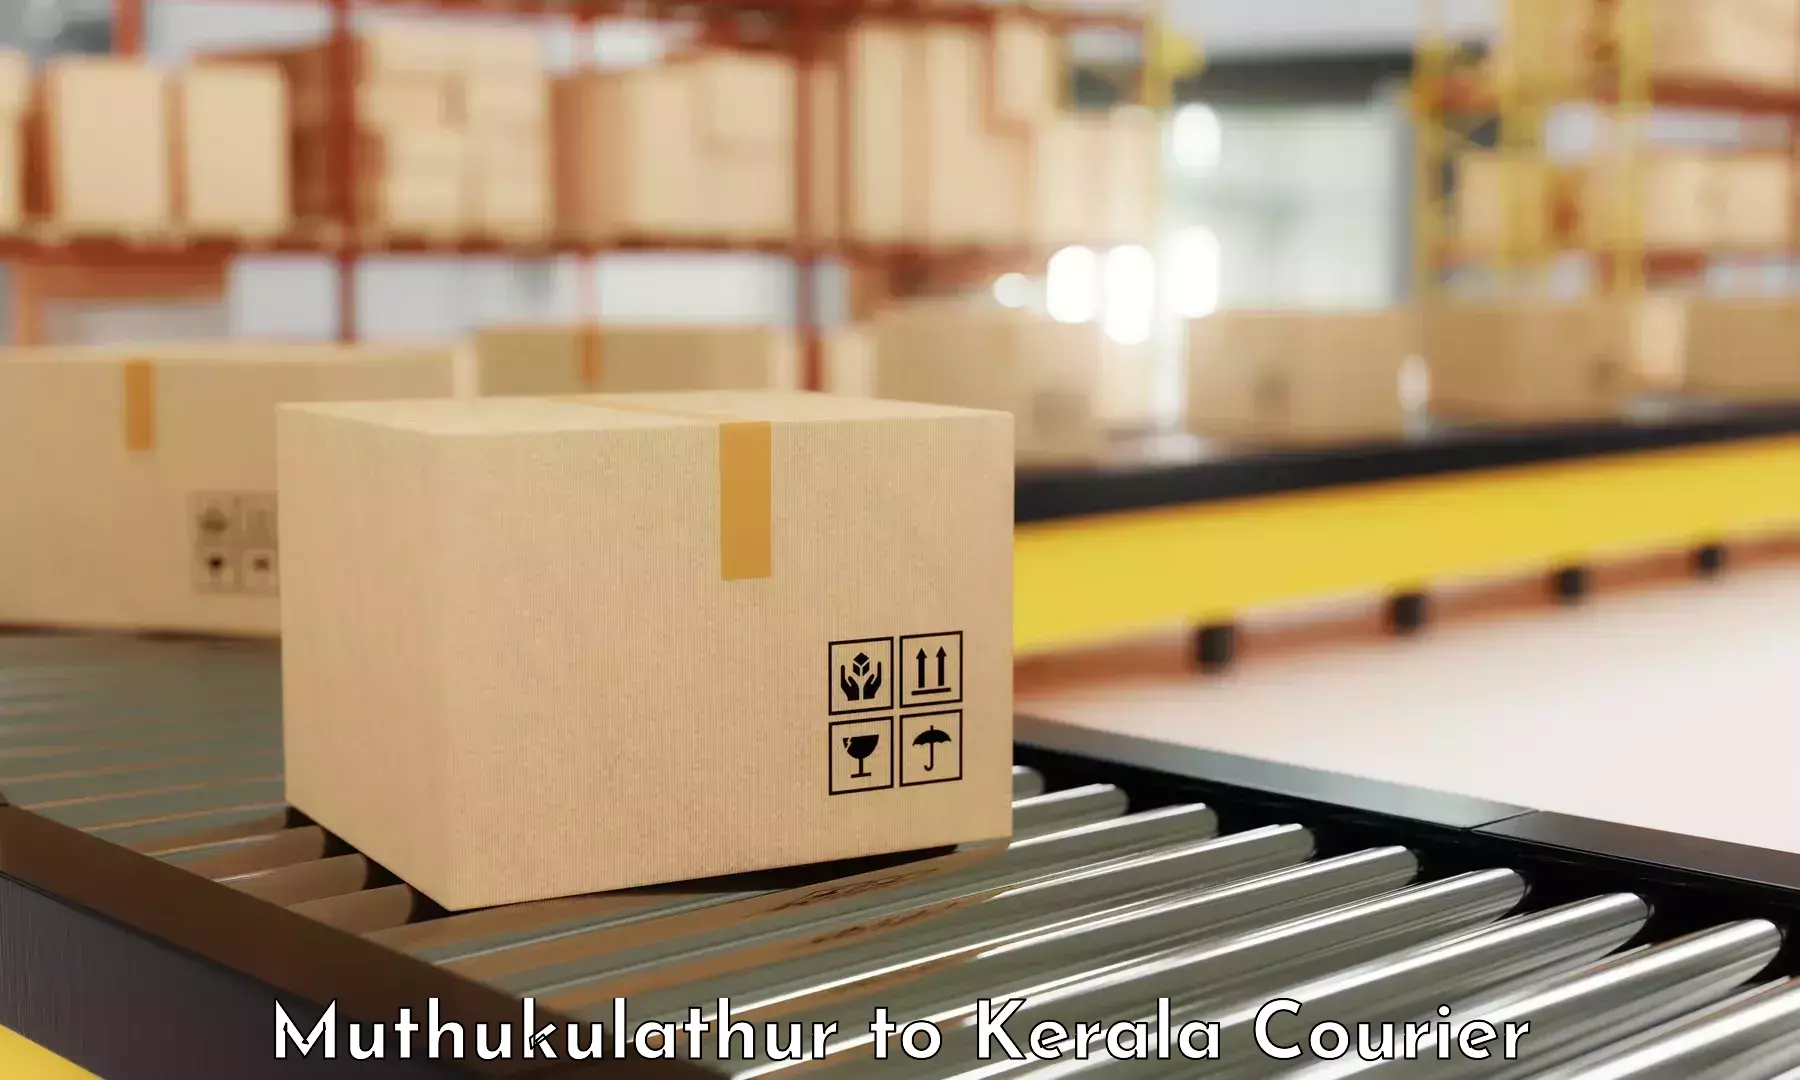 24-hour courier services Muthukulathur to Ponekkara